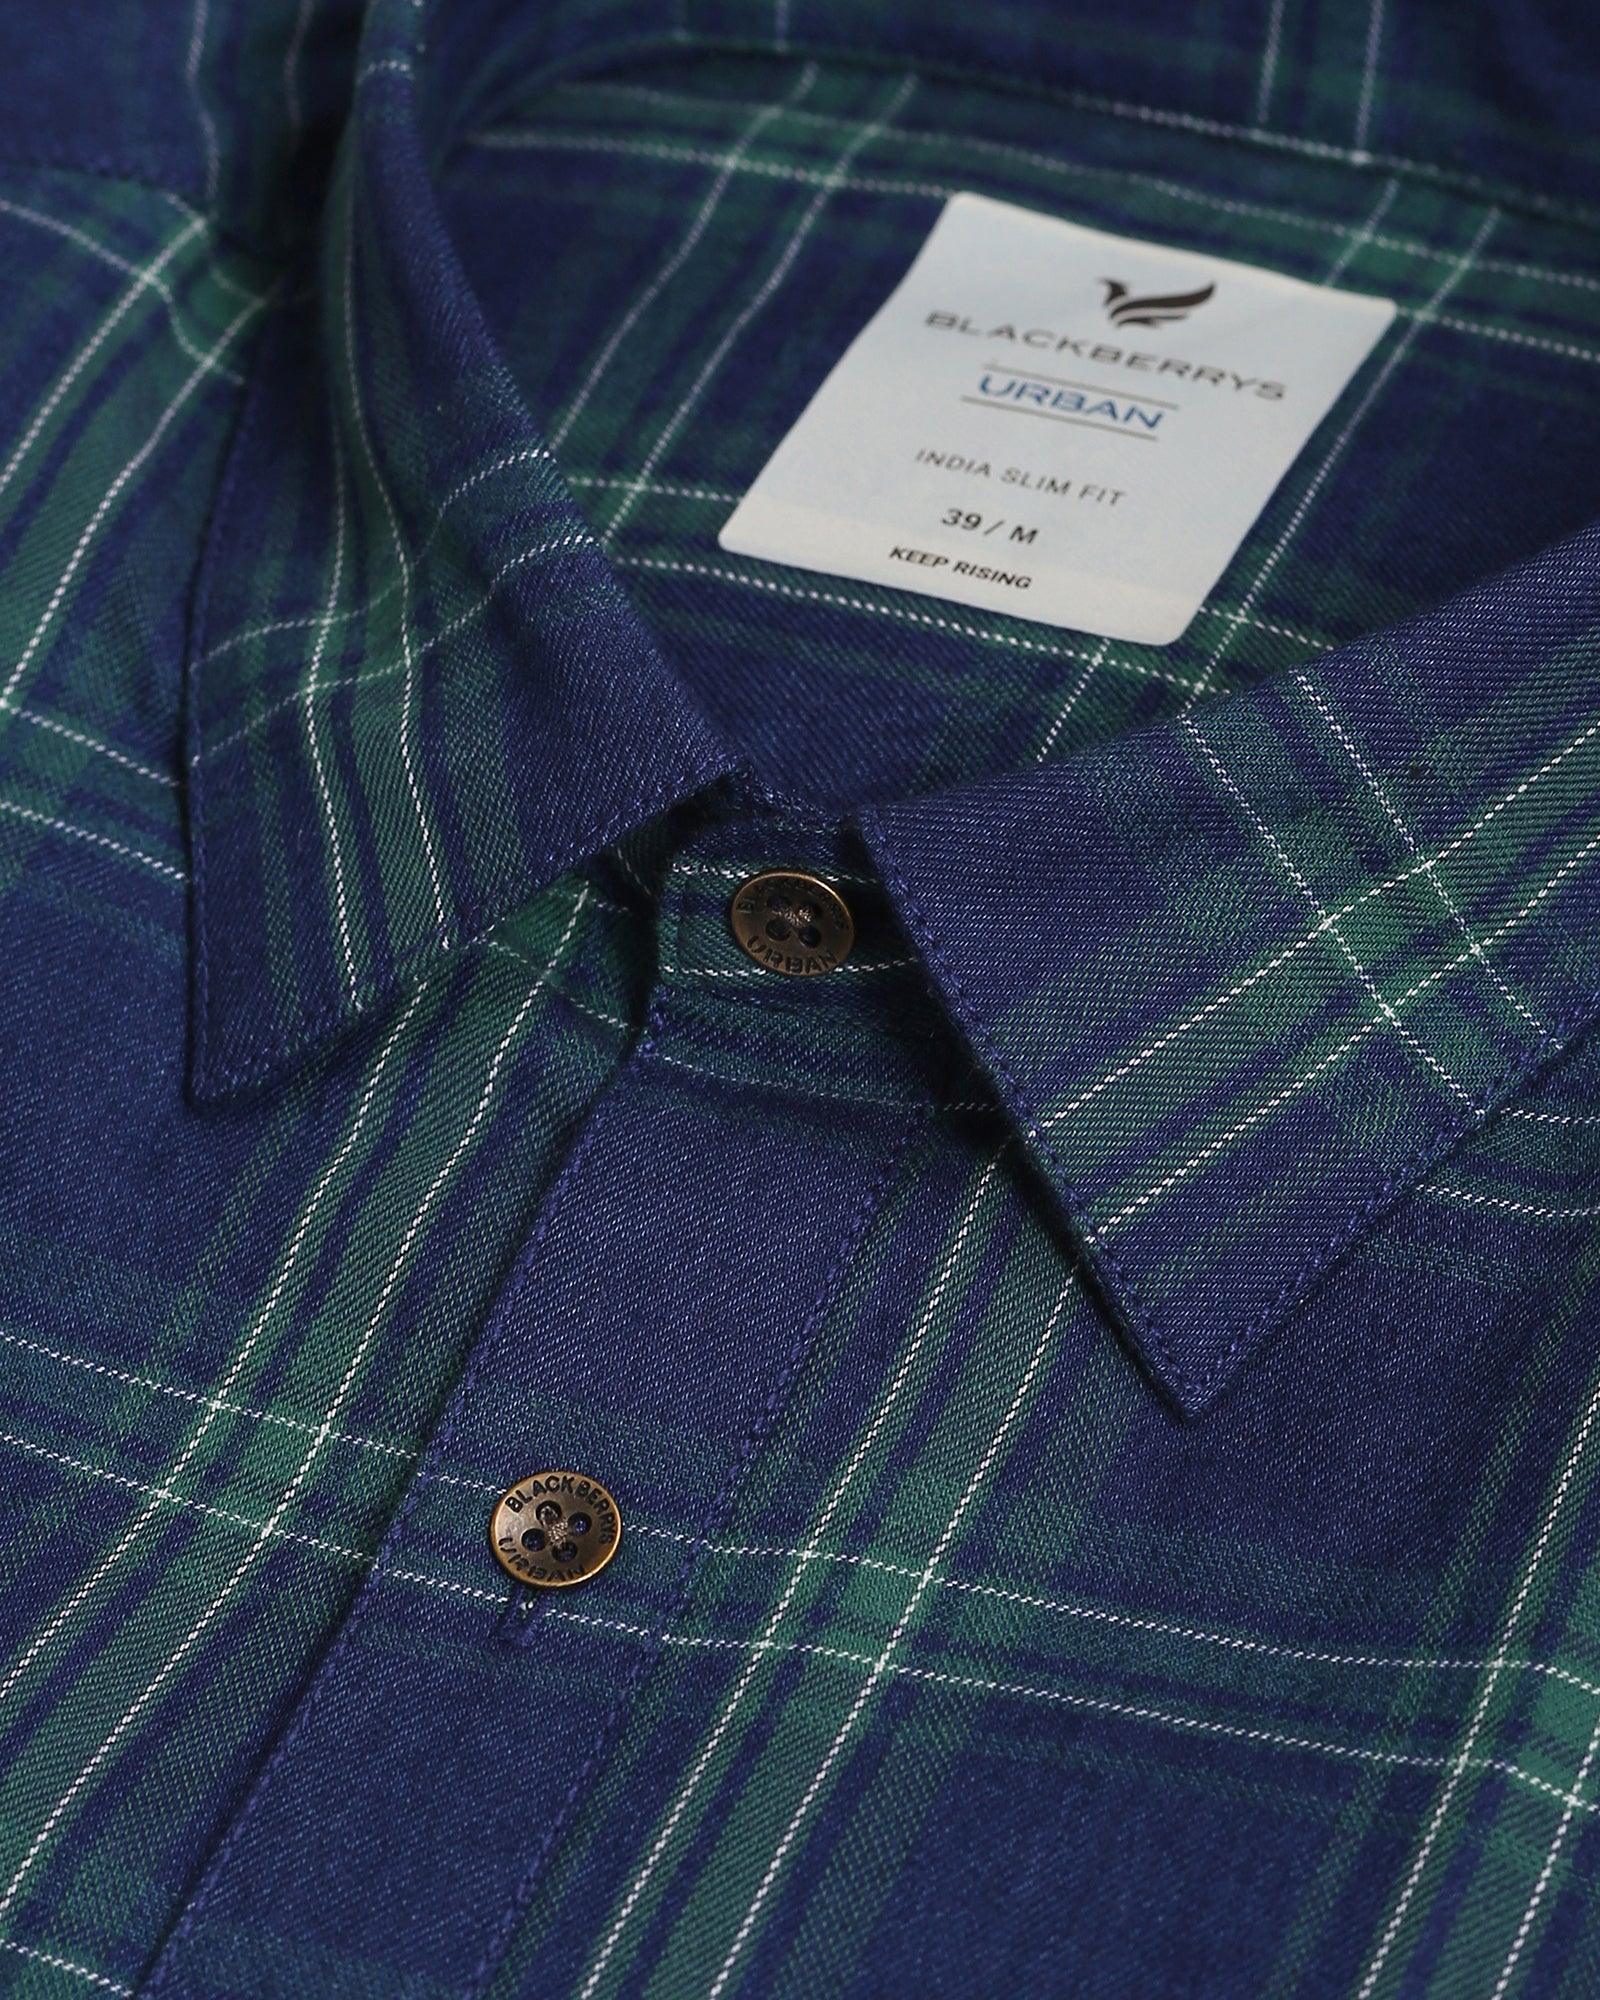 Casual Olive Check Shirt - Decky